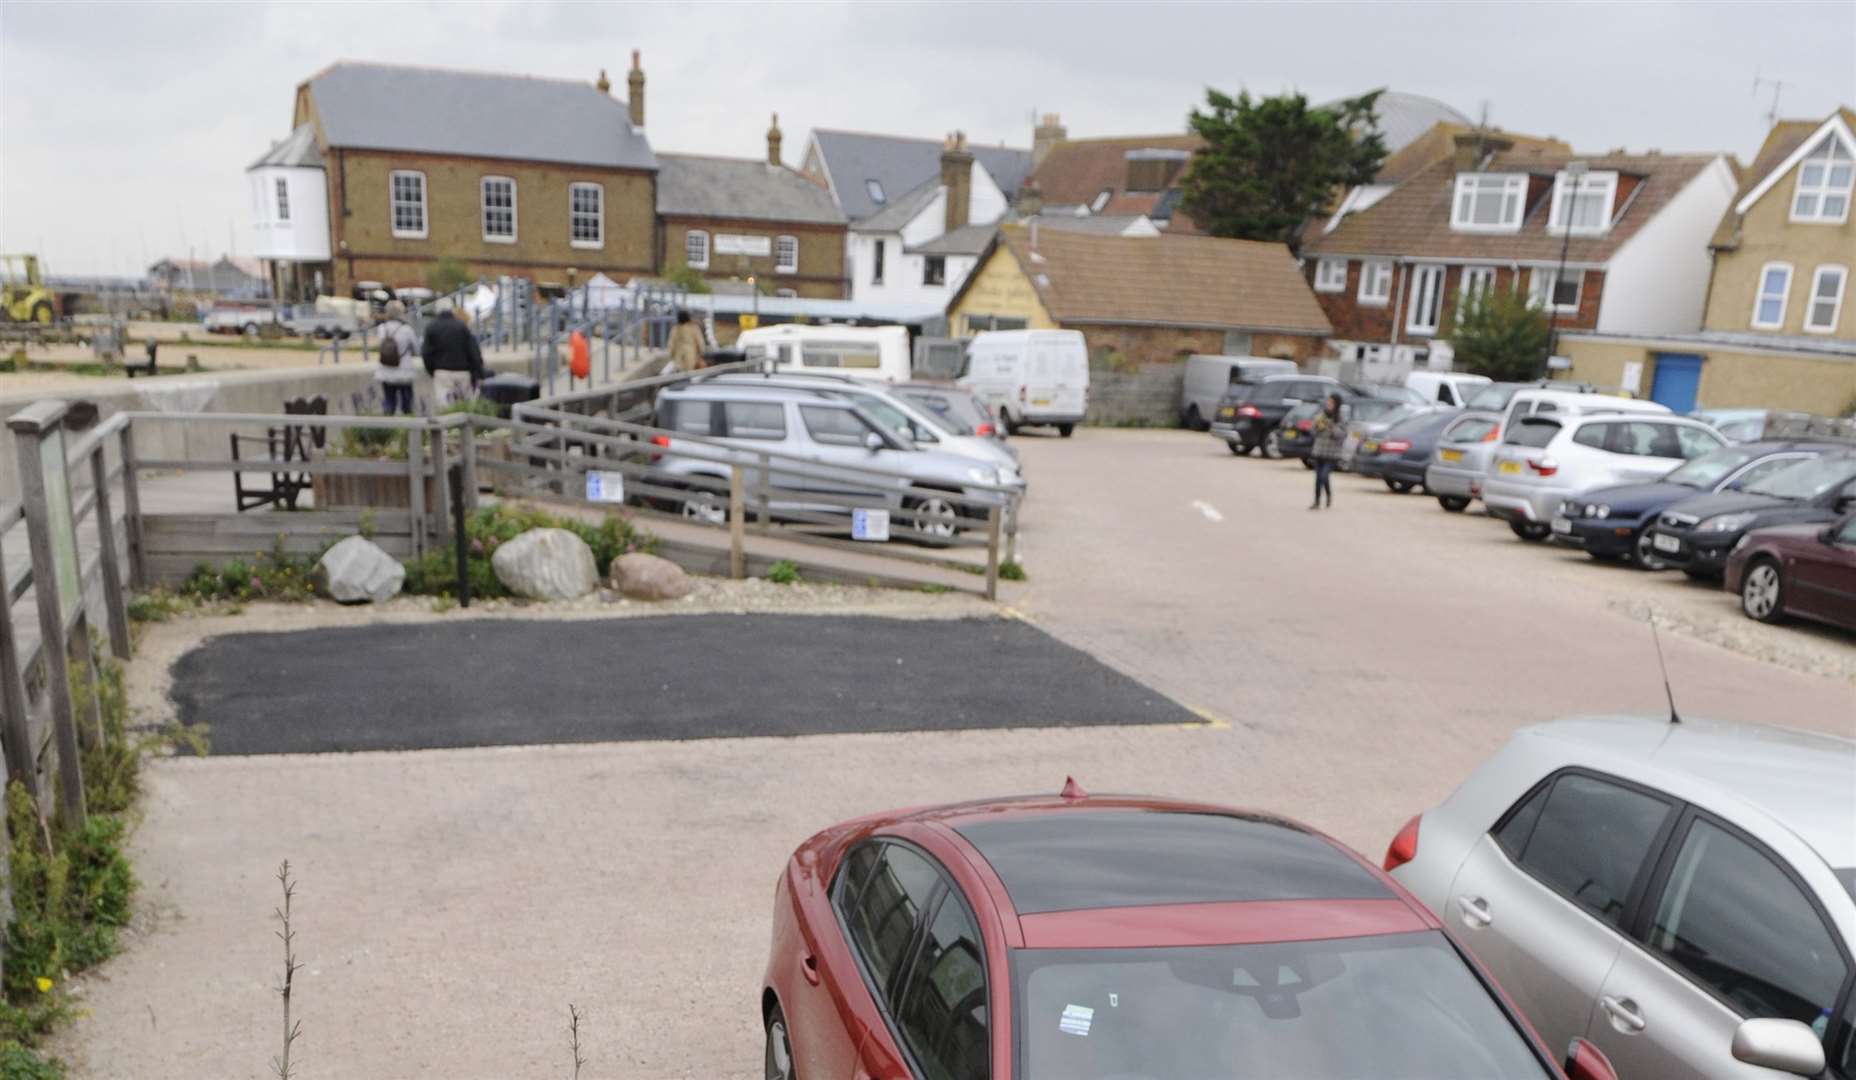 The cost of parking in Keams Yard car park, off Whitstable beach, could rise to £3.70 an hour – up from £1.60 between October and March